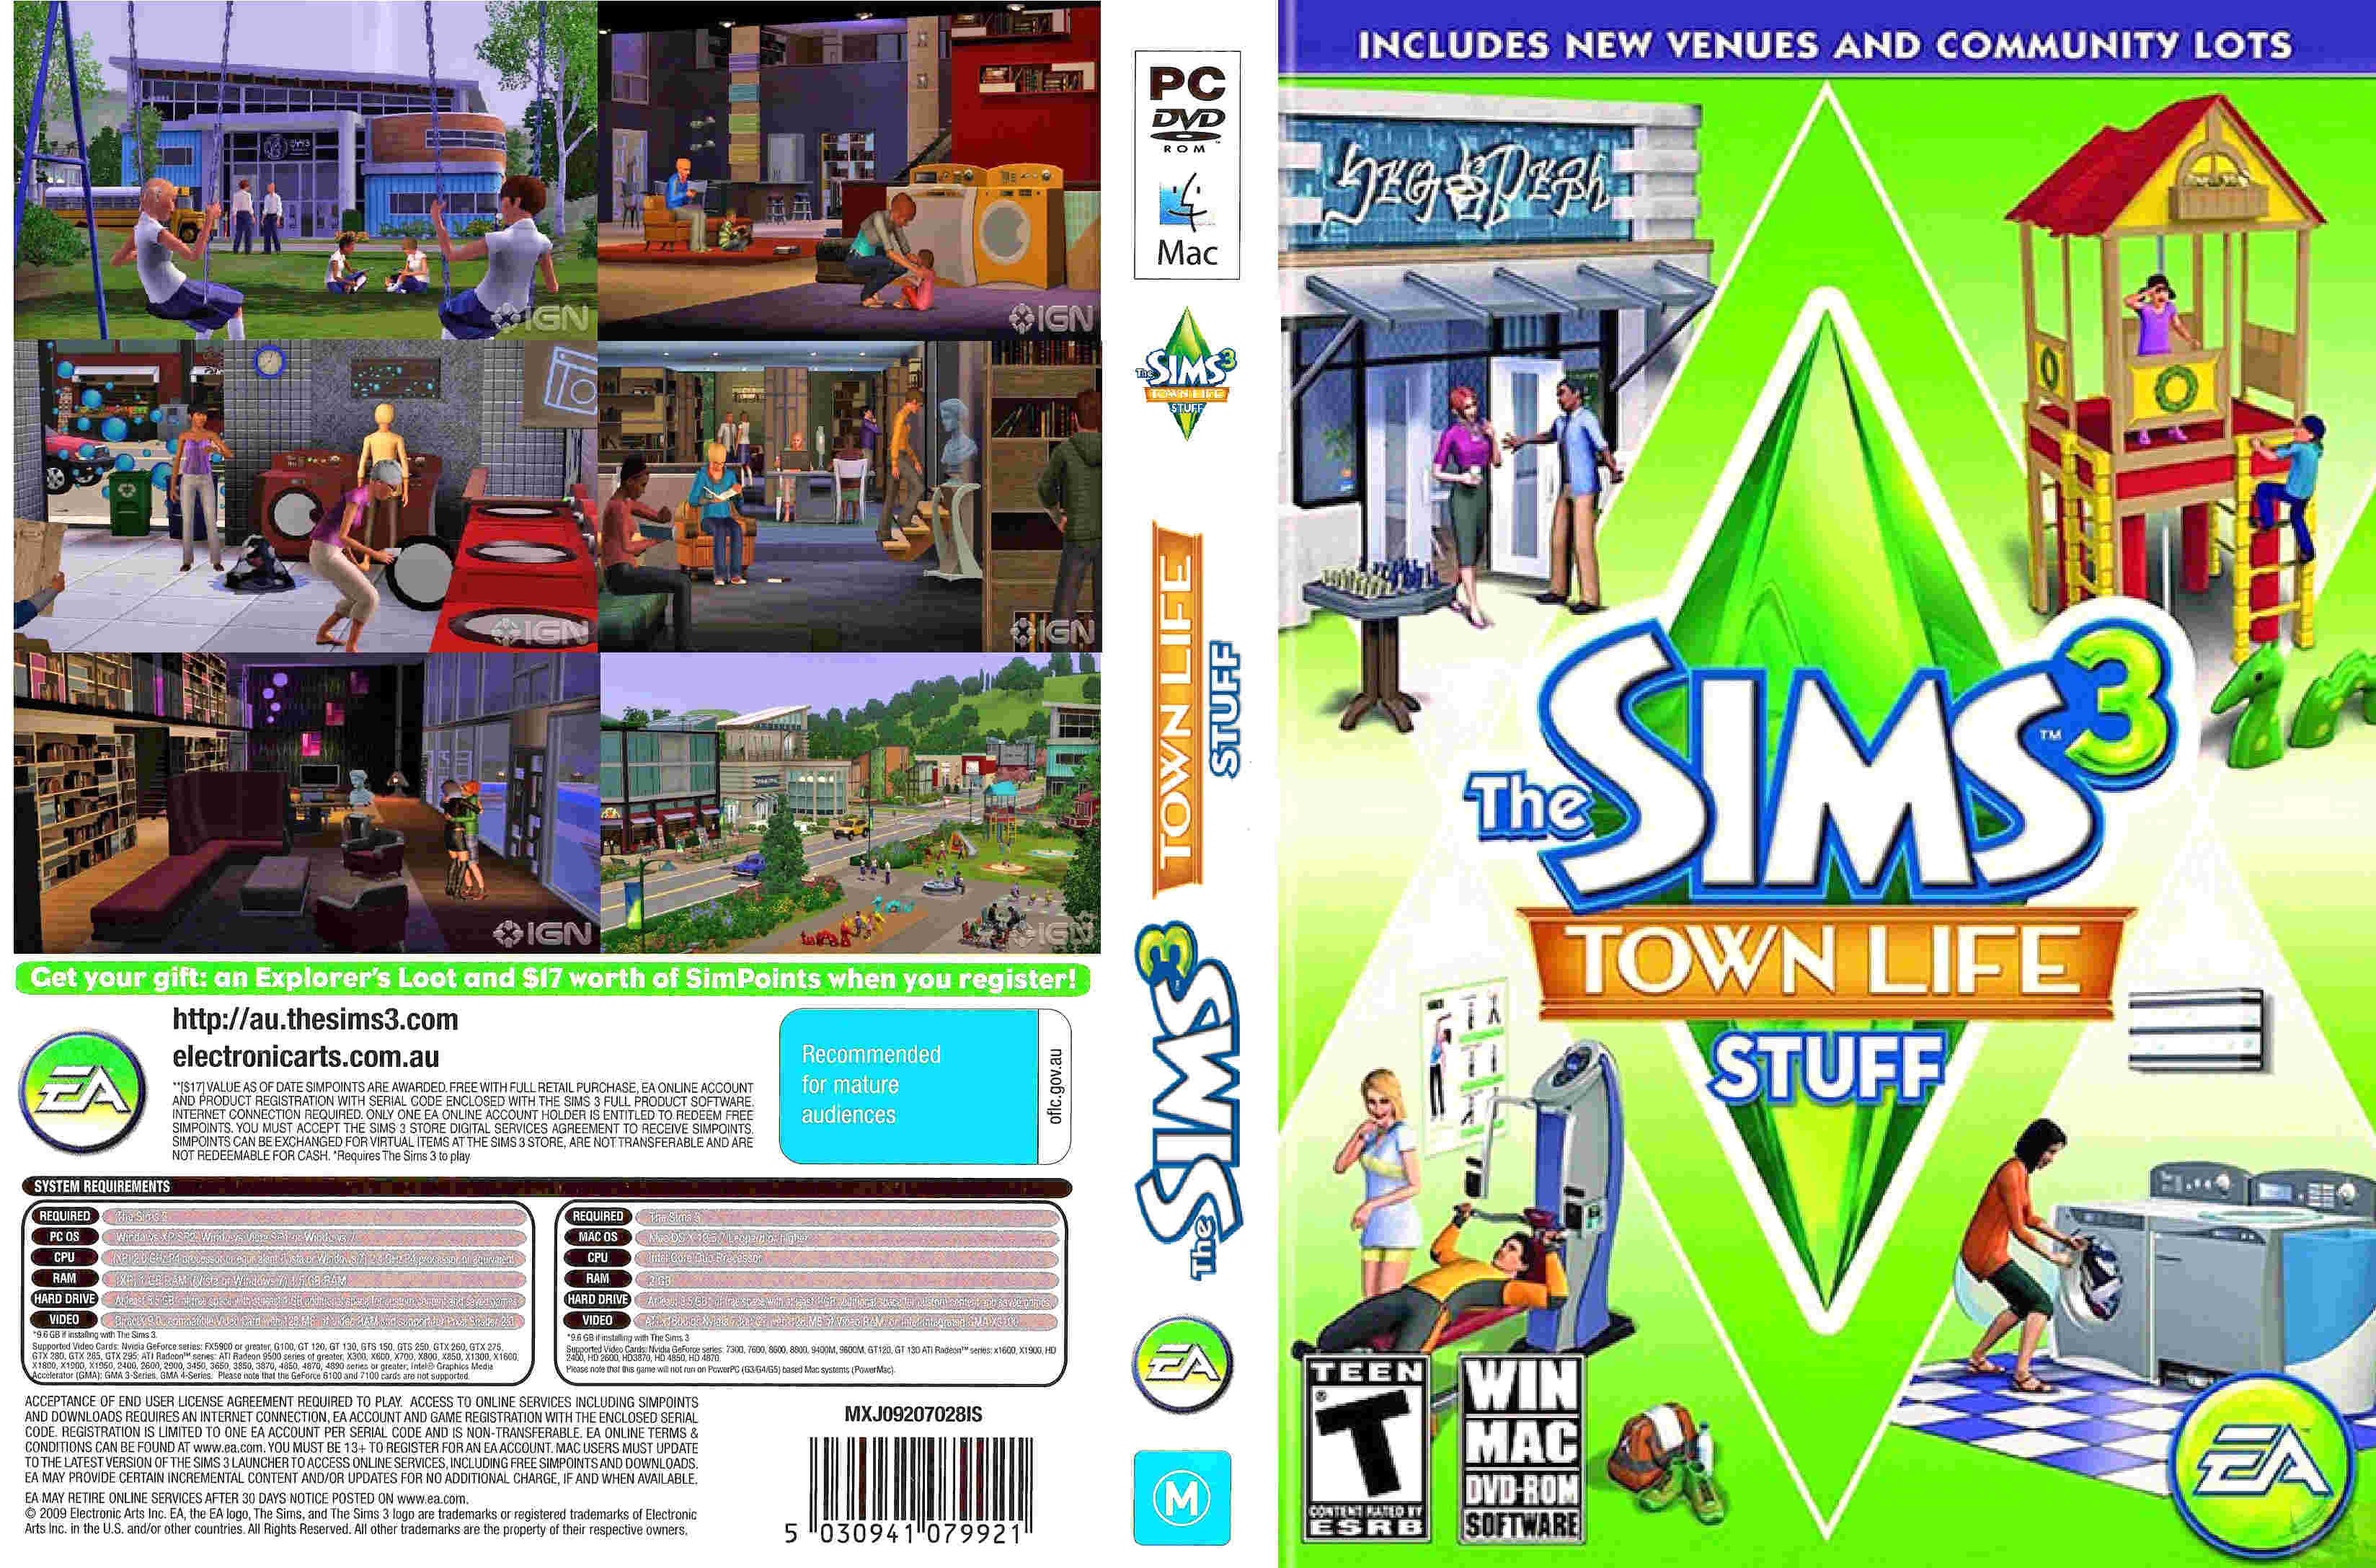 The Sims 3 Town Life Stuff – PC